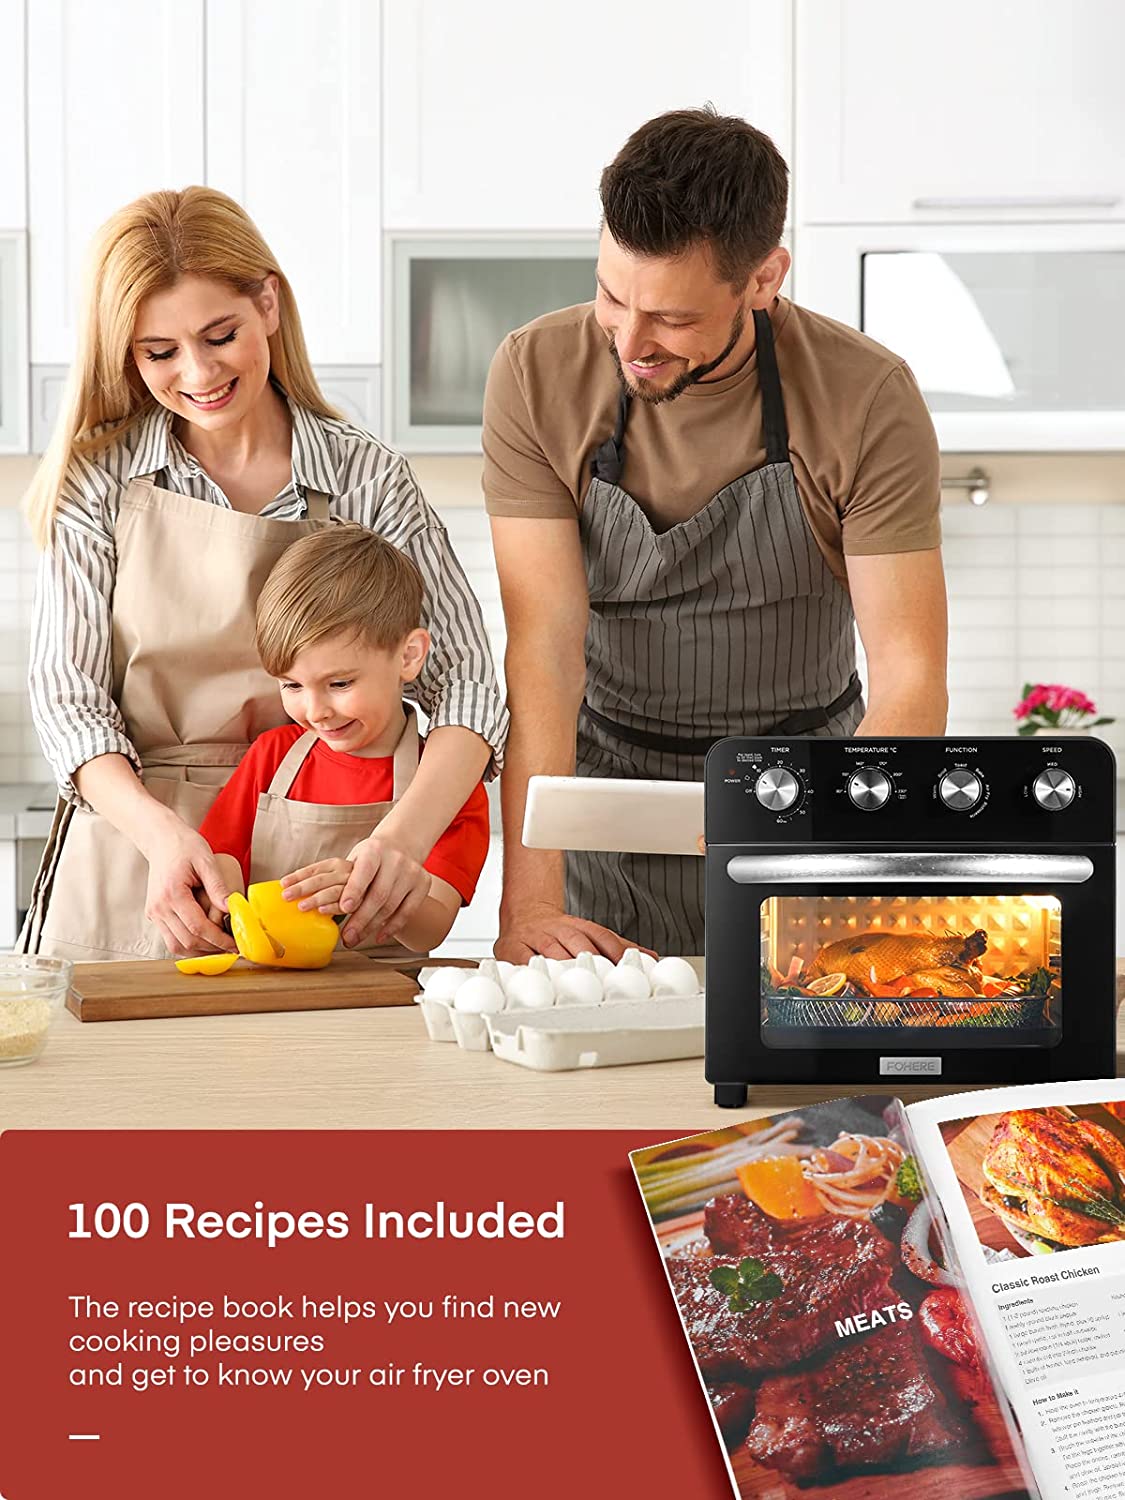 100 recipes included, FOHERE Air Fryer Oven Combo, 6 Slice 24 QT Multi-function Convection Oven, 1700W Toaster Oven for Rotisserie, Dehydrate, Air Fry, Bake & Reheat, Fry Oil-Free, Non-Stick Inner, 6 Accessories & 100 Recipes